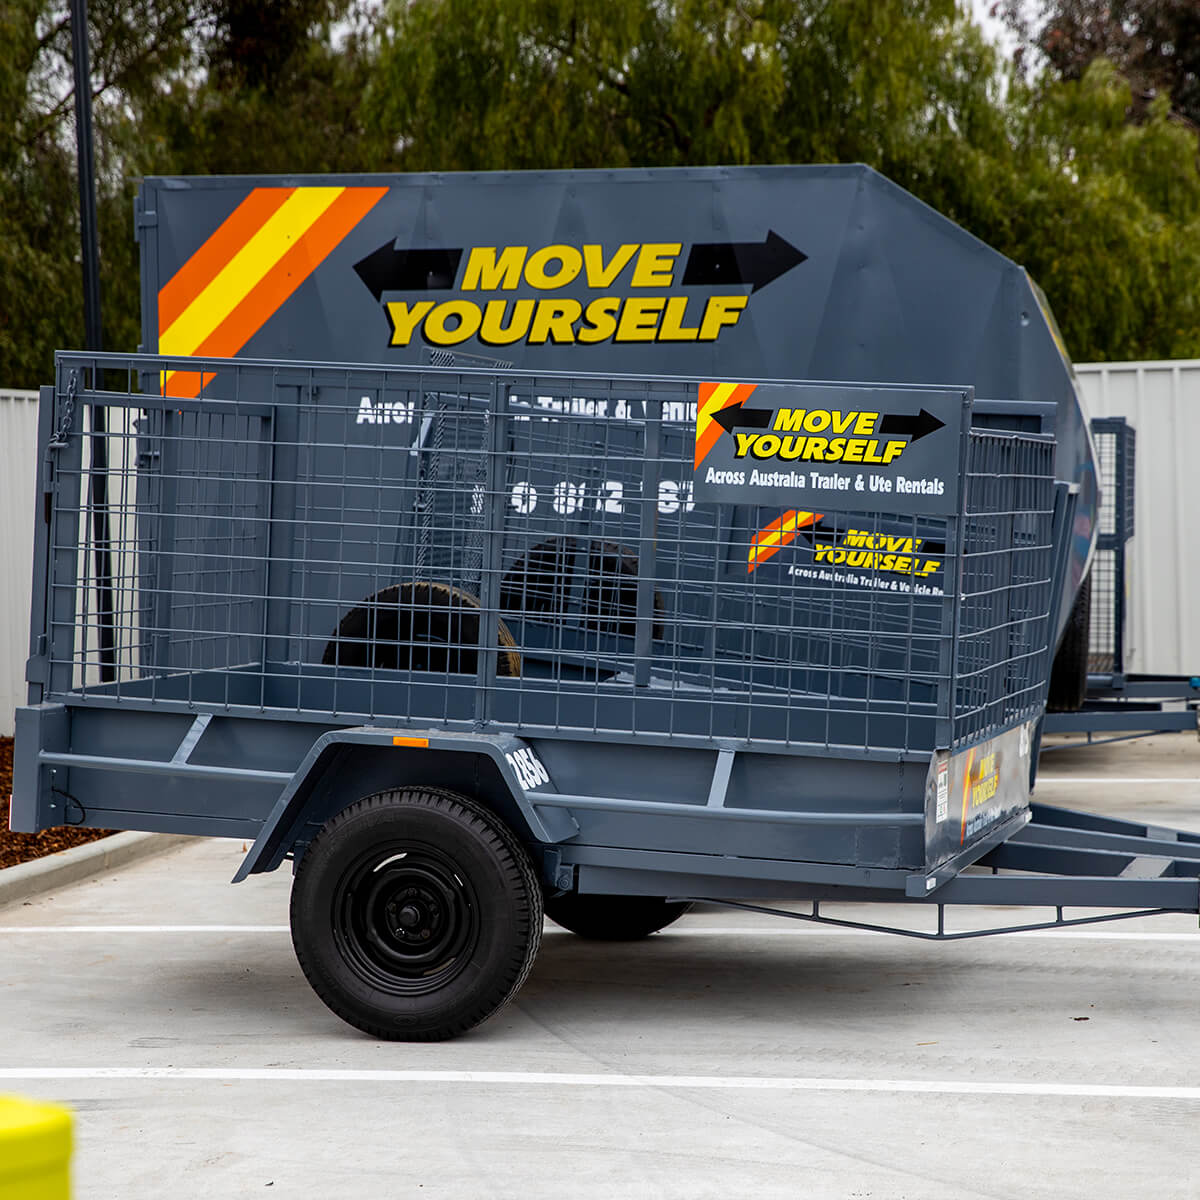 Move Yourself Trailer Hire - Book online, it's fast and simple